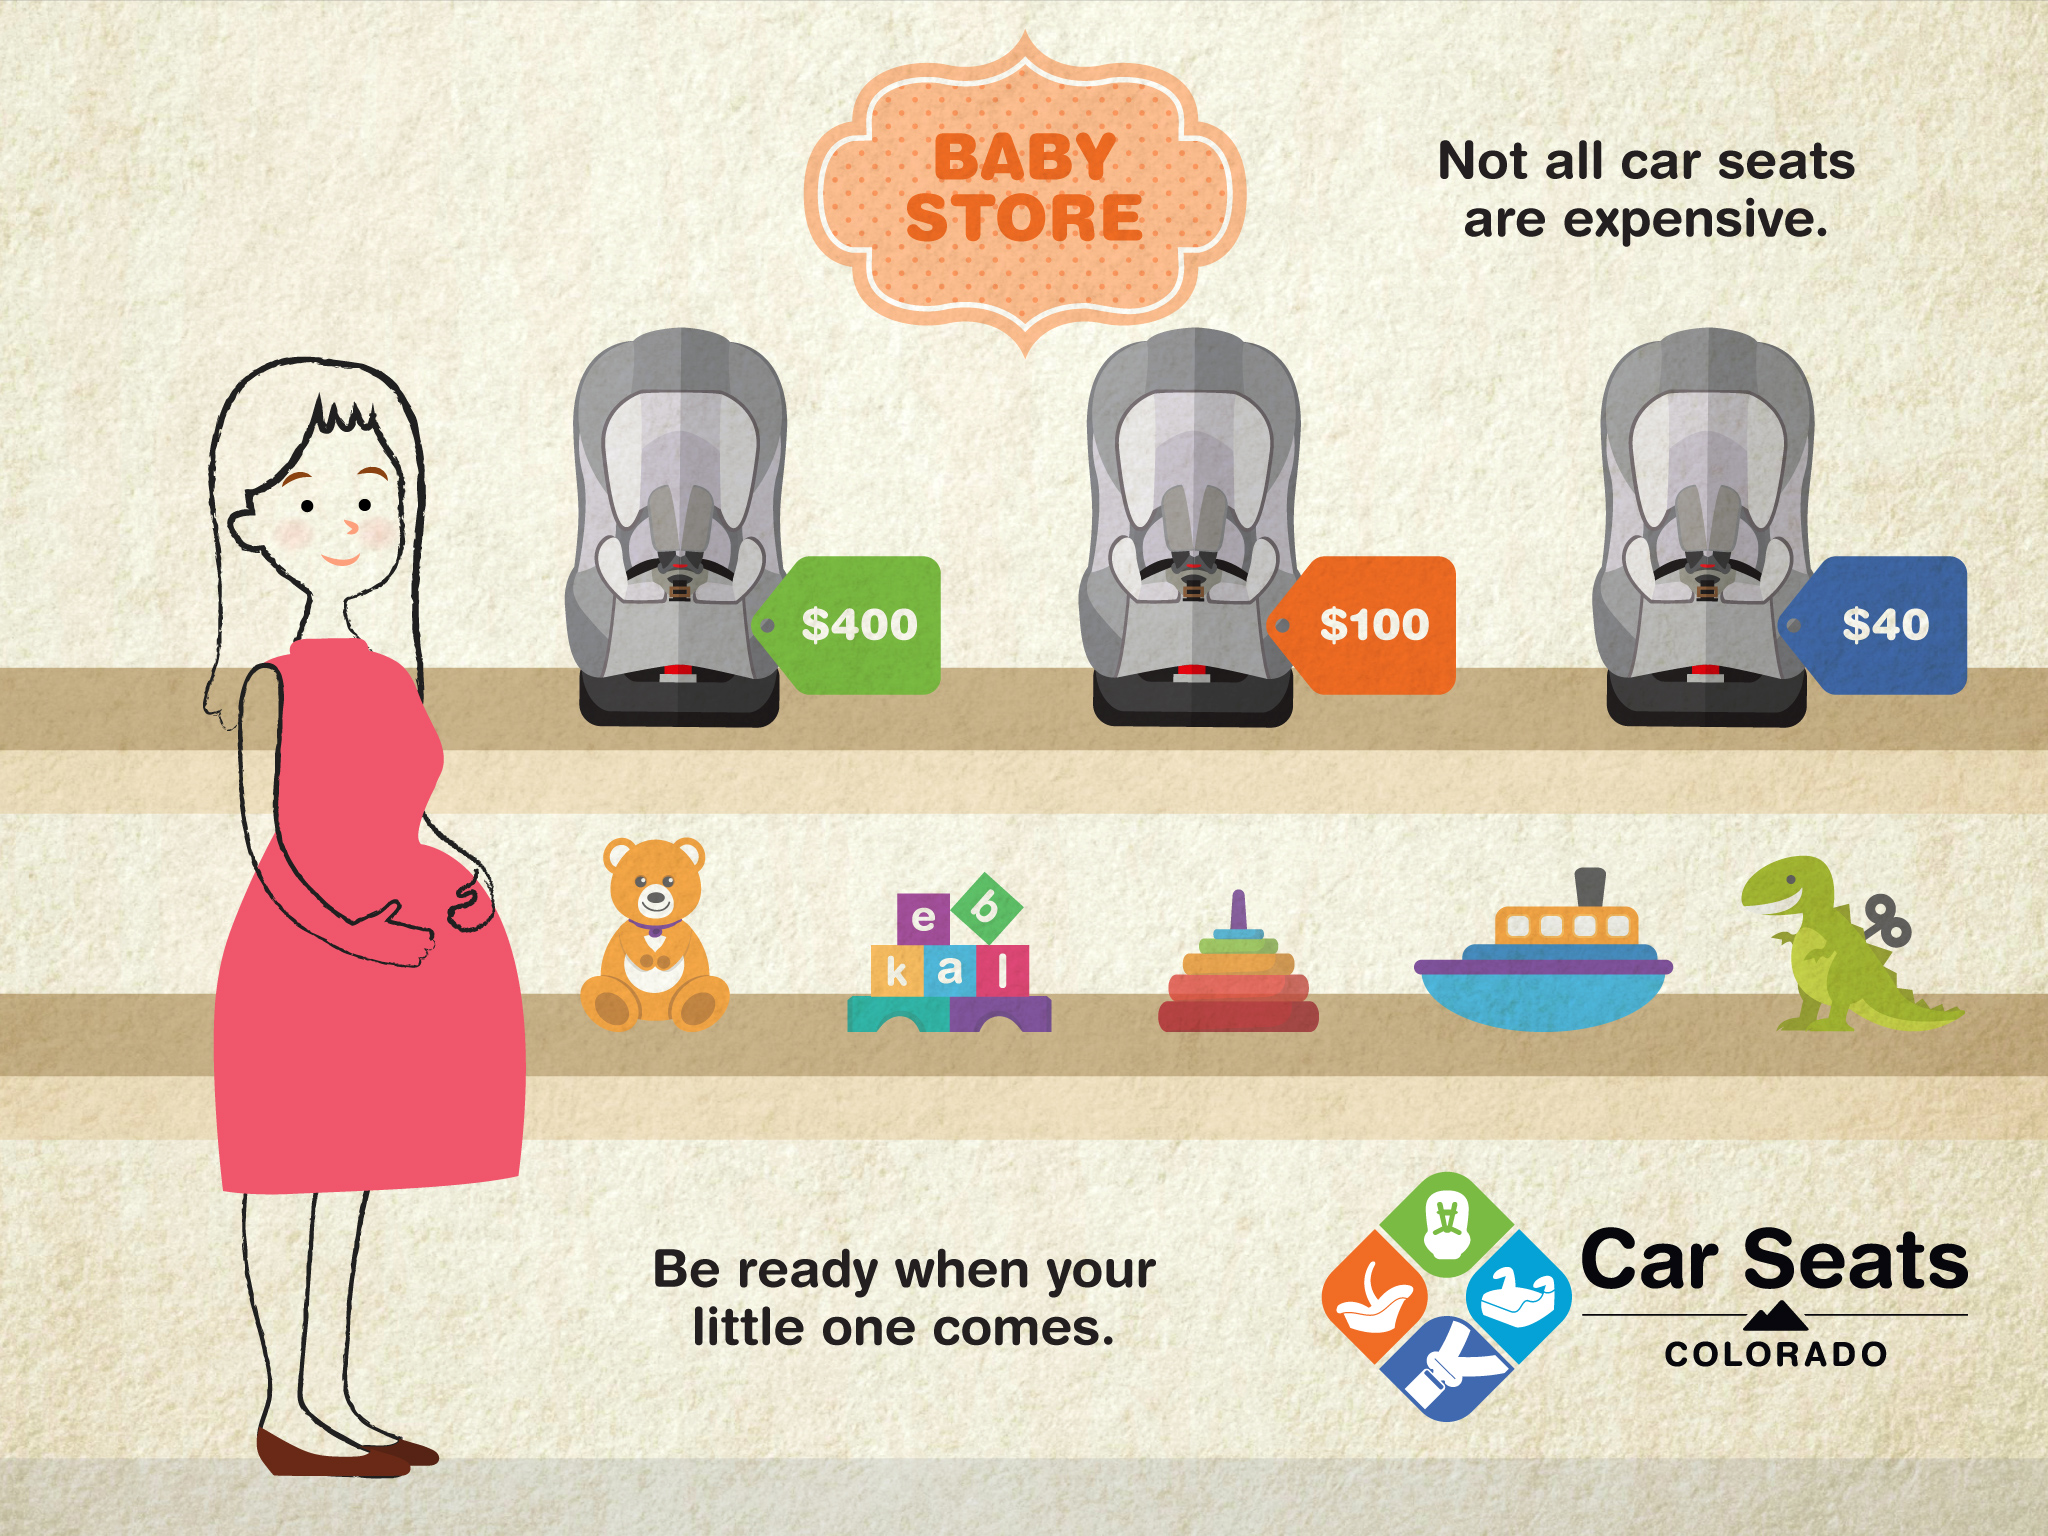 Car-Seat-Cost detail image